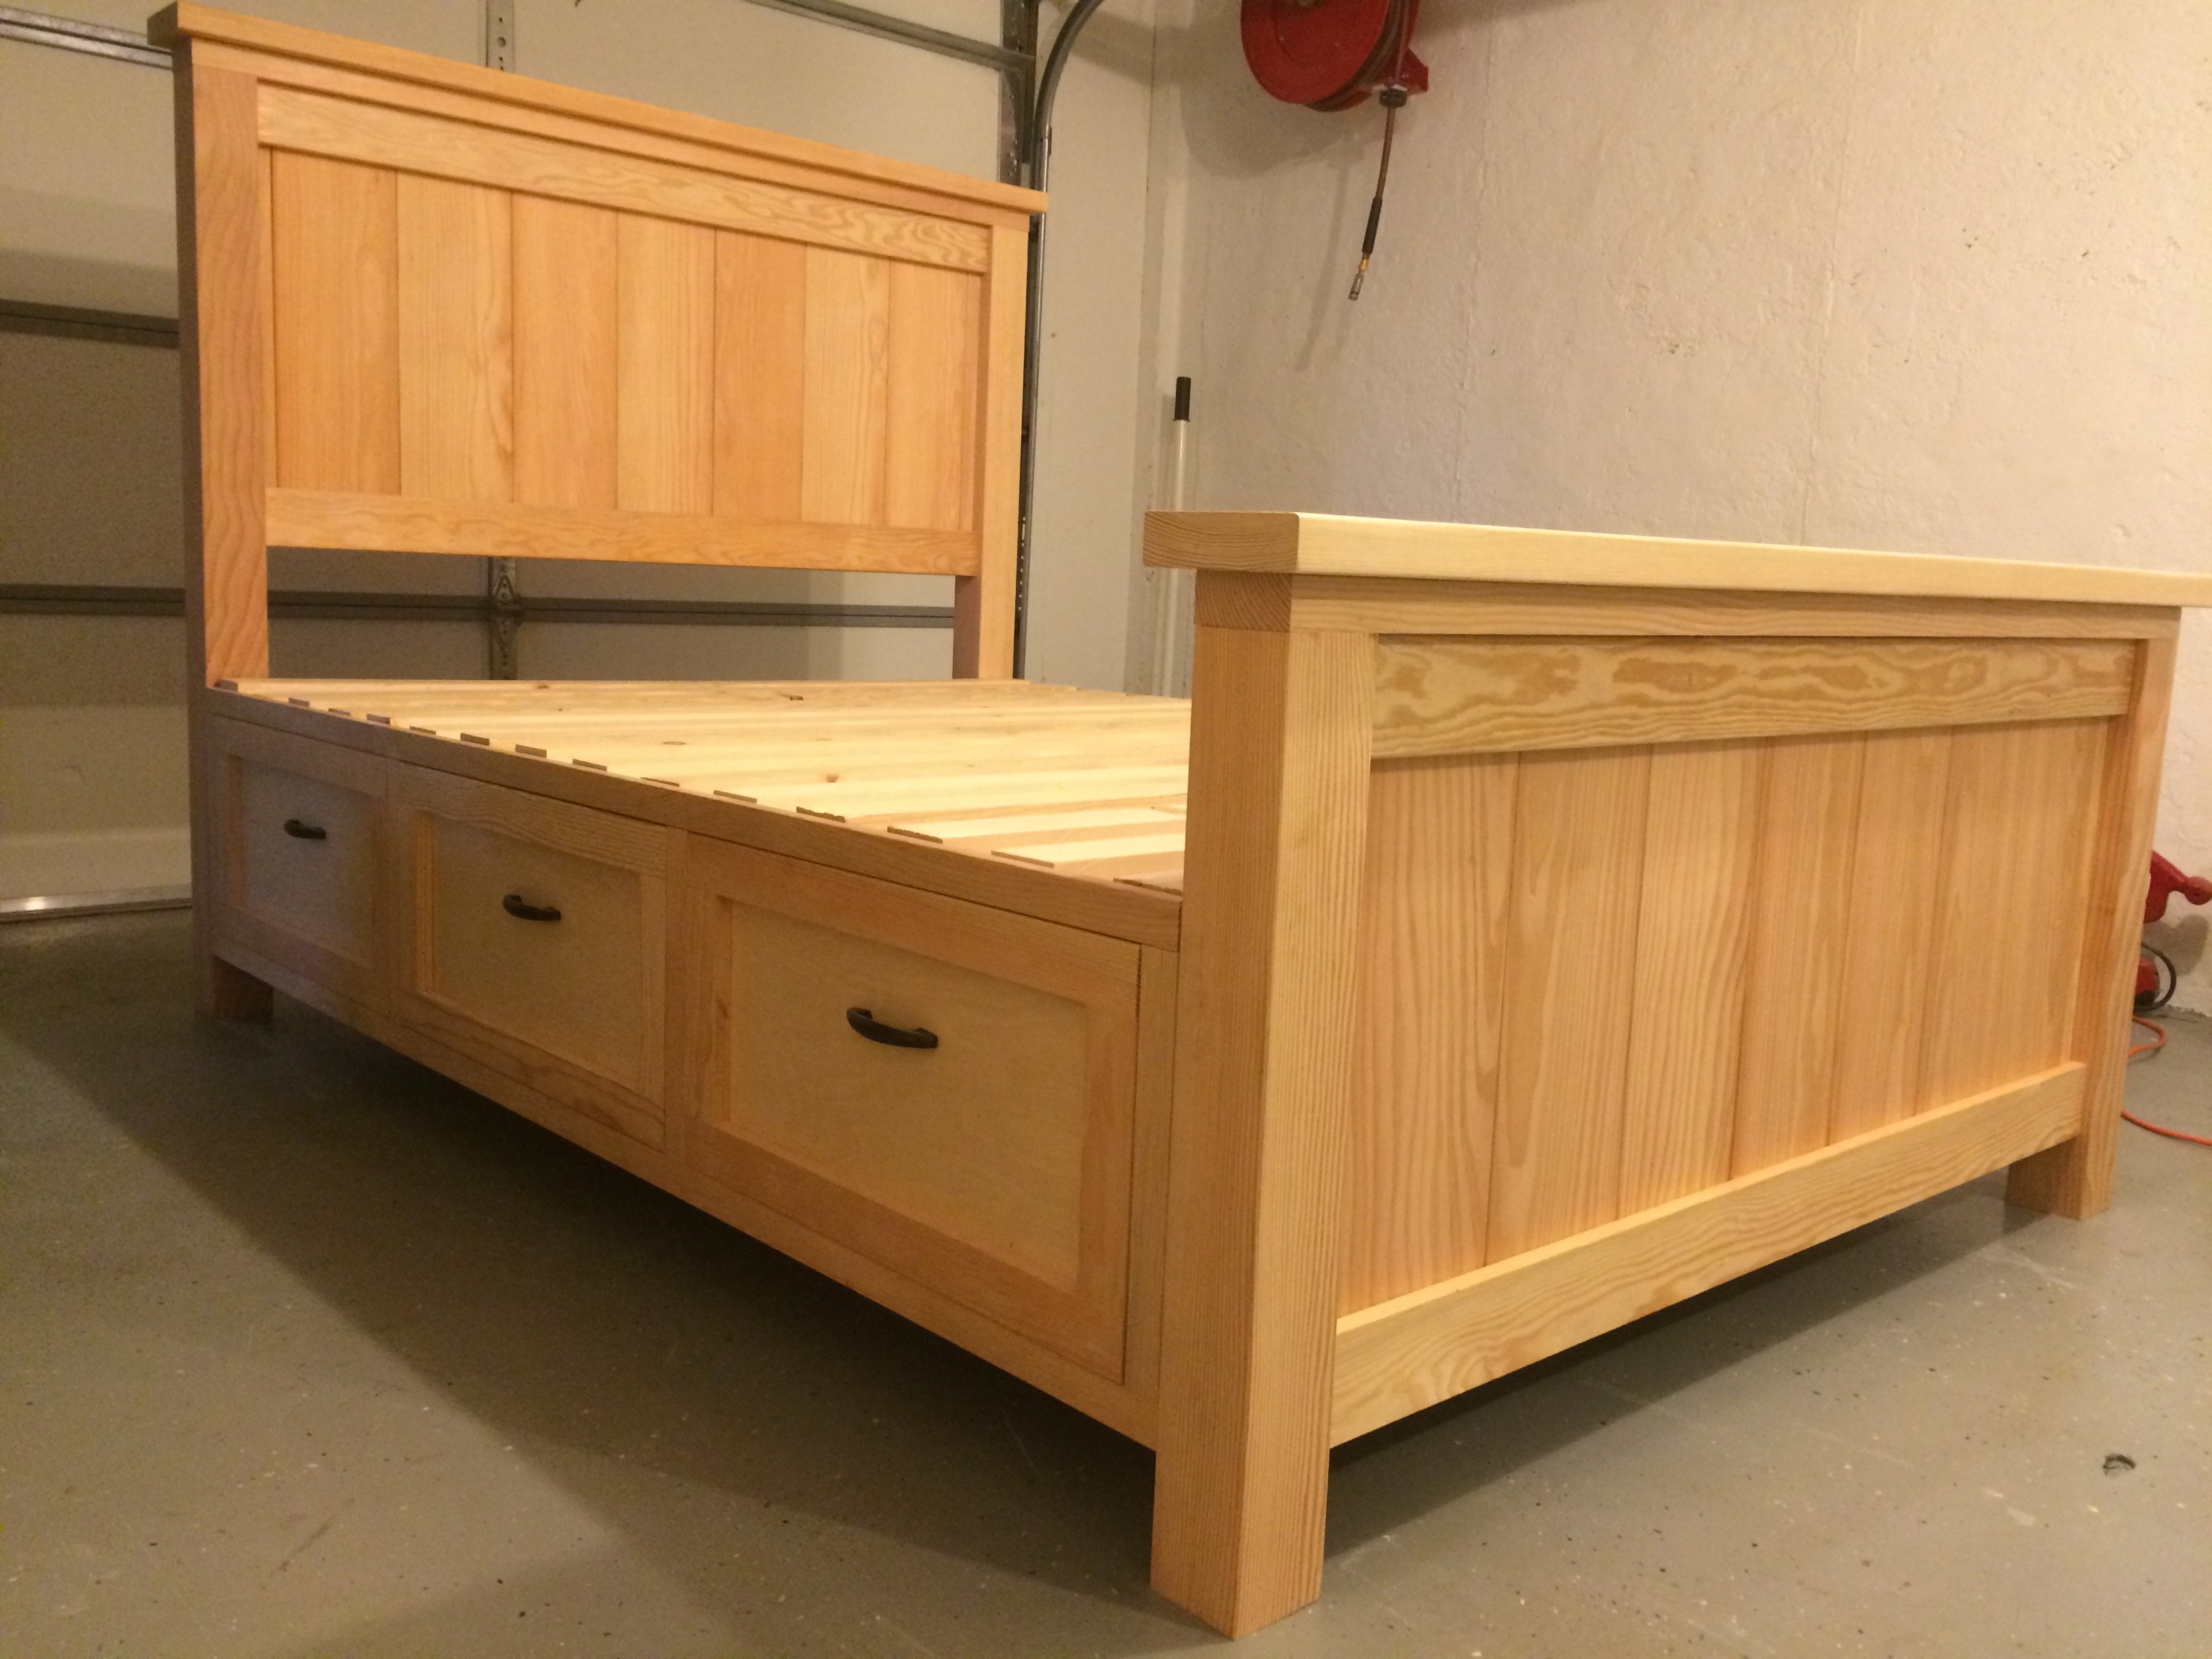 Farmhouse Storage Bed With Drawers, Bed Frames With Drawers Underneath Queen